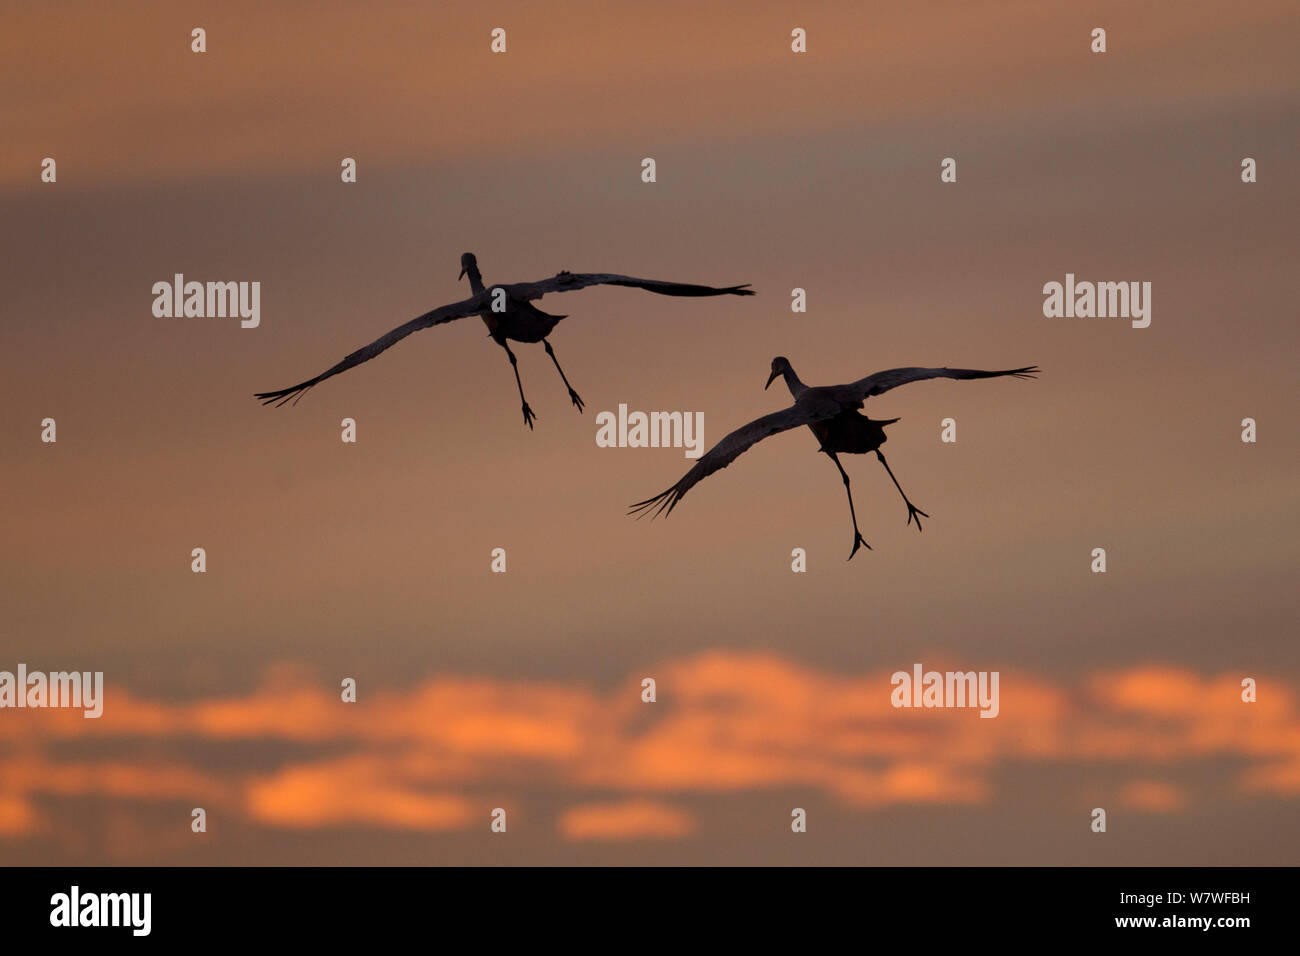 Sandhill Cranes (Grus canadensis) flying in to roost at dusk, Bosque del Apache, New Mexico, USA, December. Stock Photo